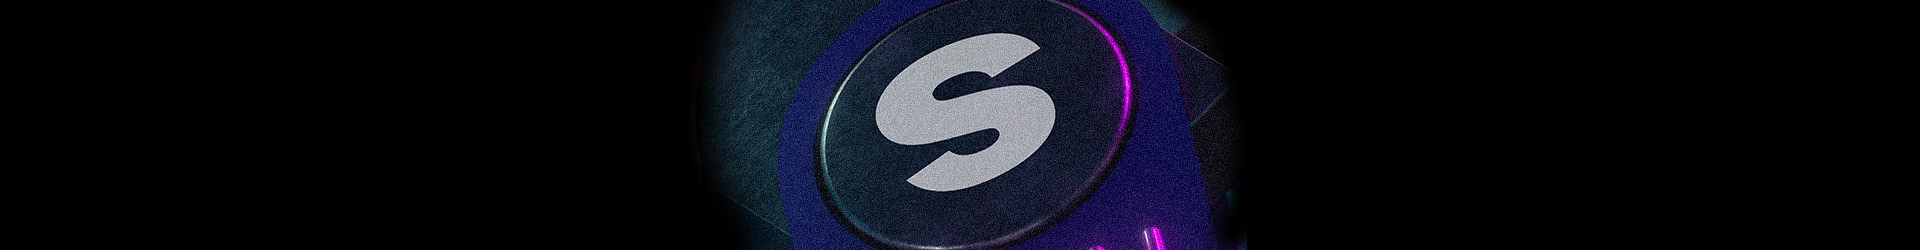 Spinnin’ Sounds goes back to the start with Splice Big Room Vol. 2 sample pack